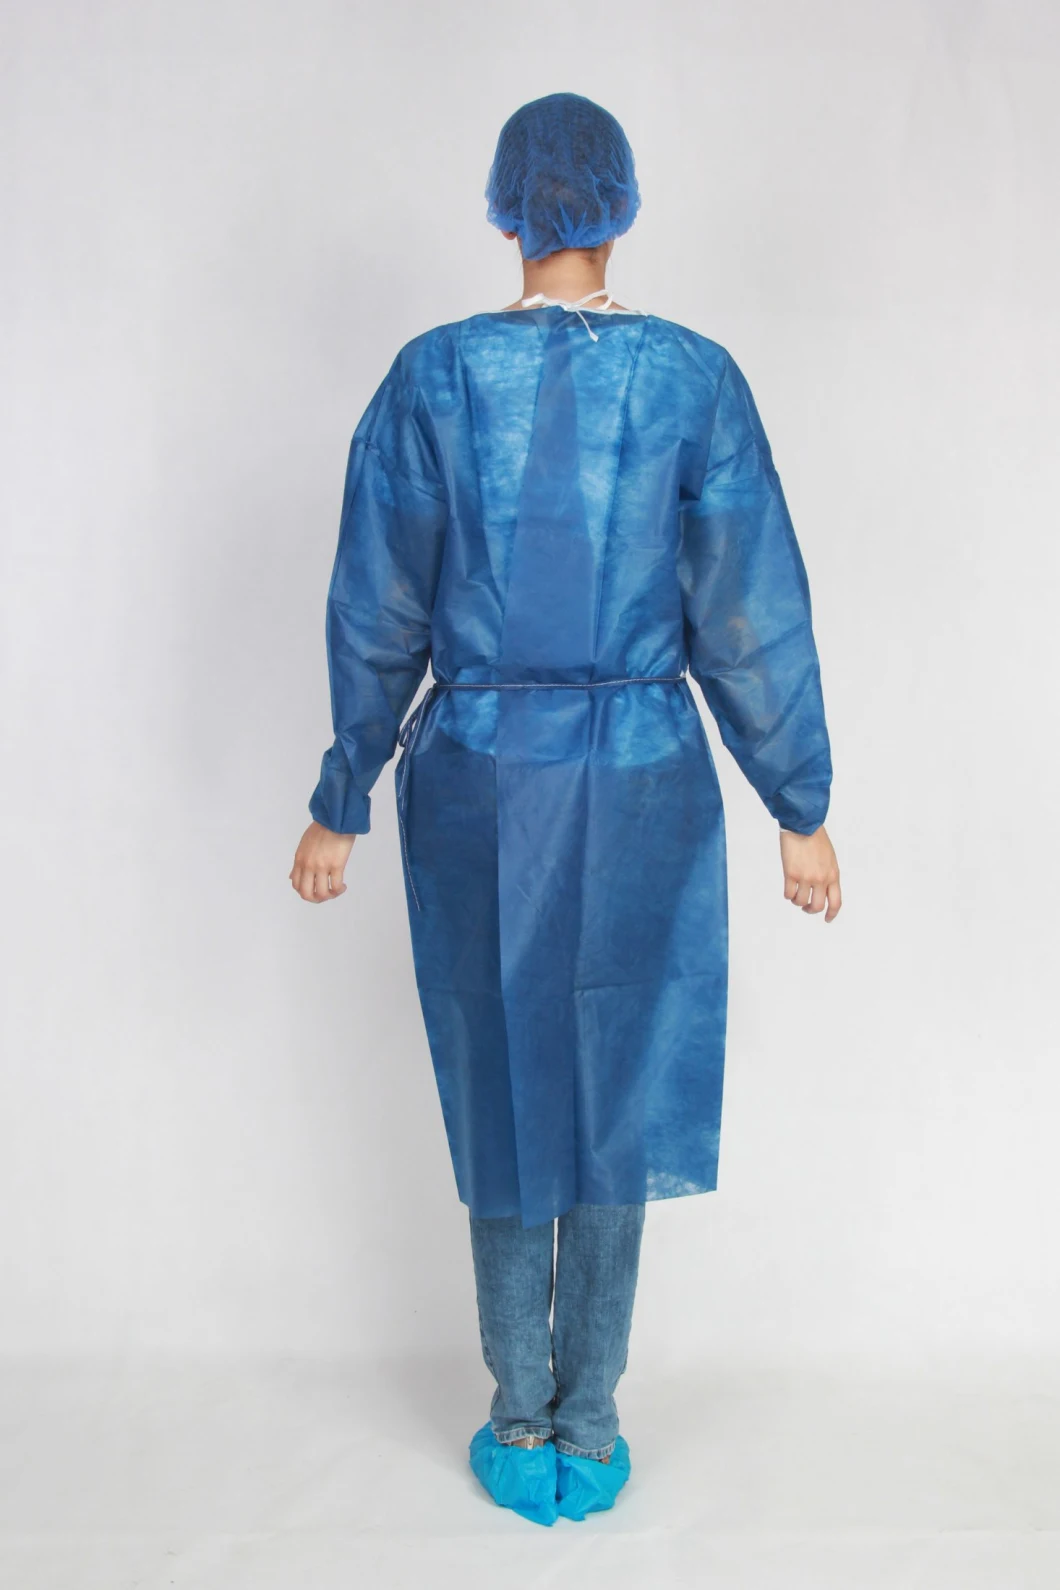 Best Price Non-Woven Fabric Disposable Level 1/2/3/4 Isolation Gown